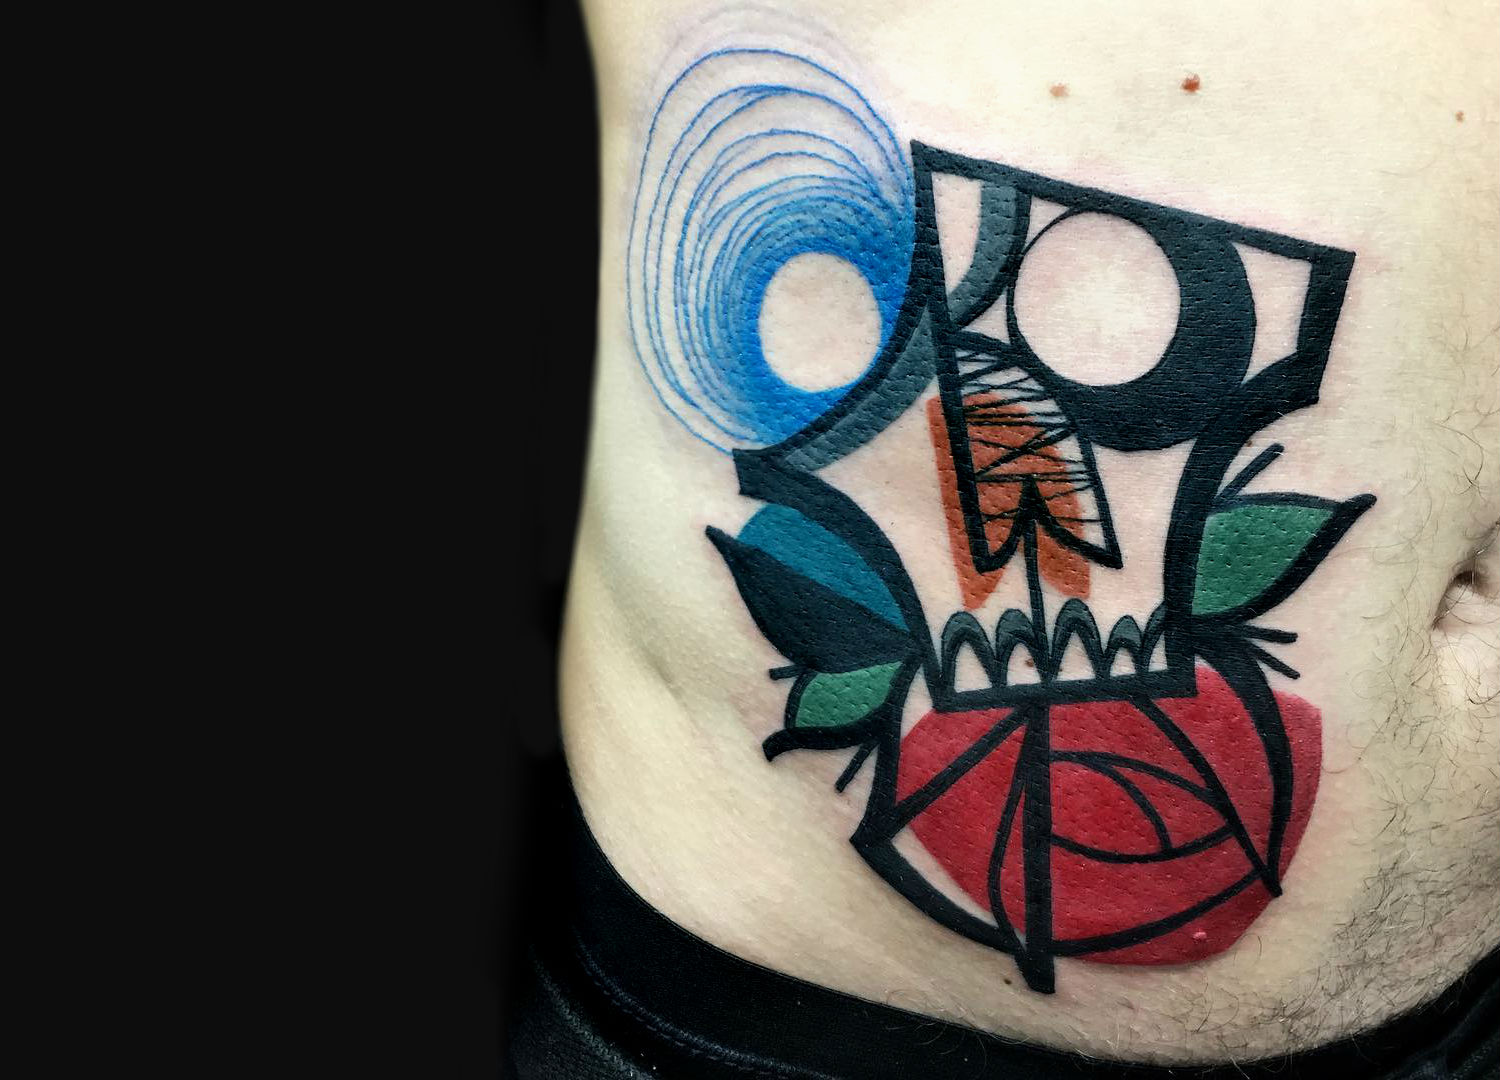 Cubist skull and rose tattoo by Mike Boyd